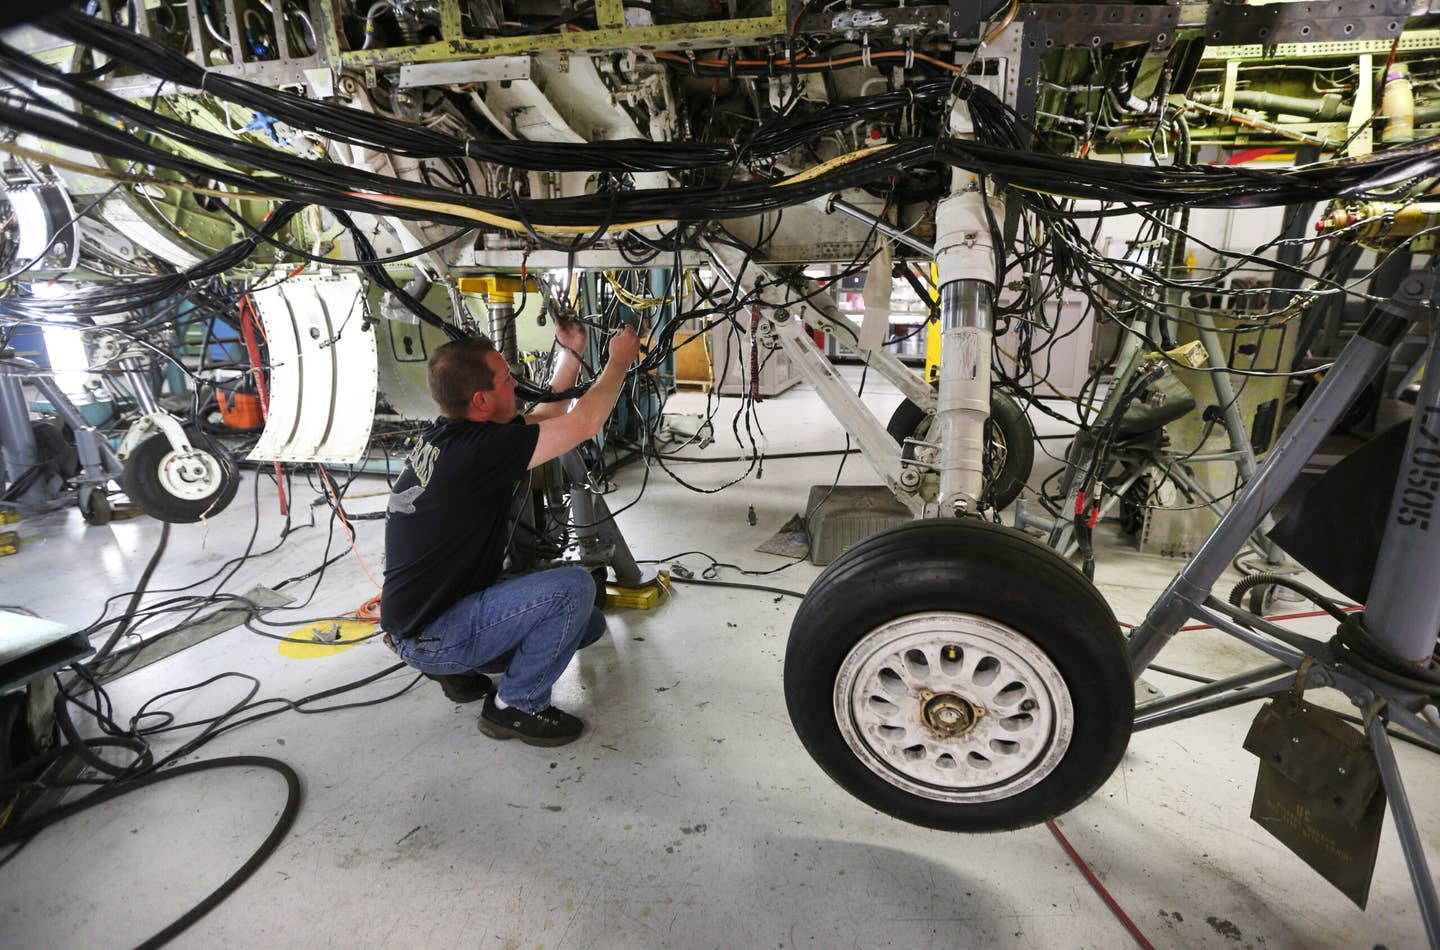 An aircraft mechanic works on then underside of an F-16 Falcon at Hill Air Force base in Ogden, Utah.  (Photo by George Frey/Getty Images)